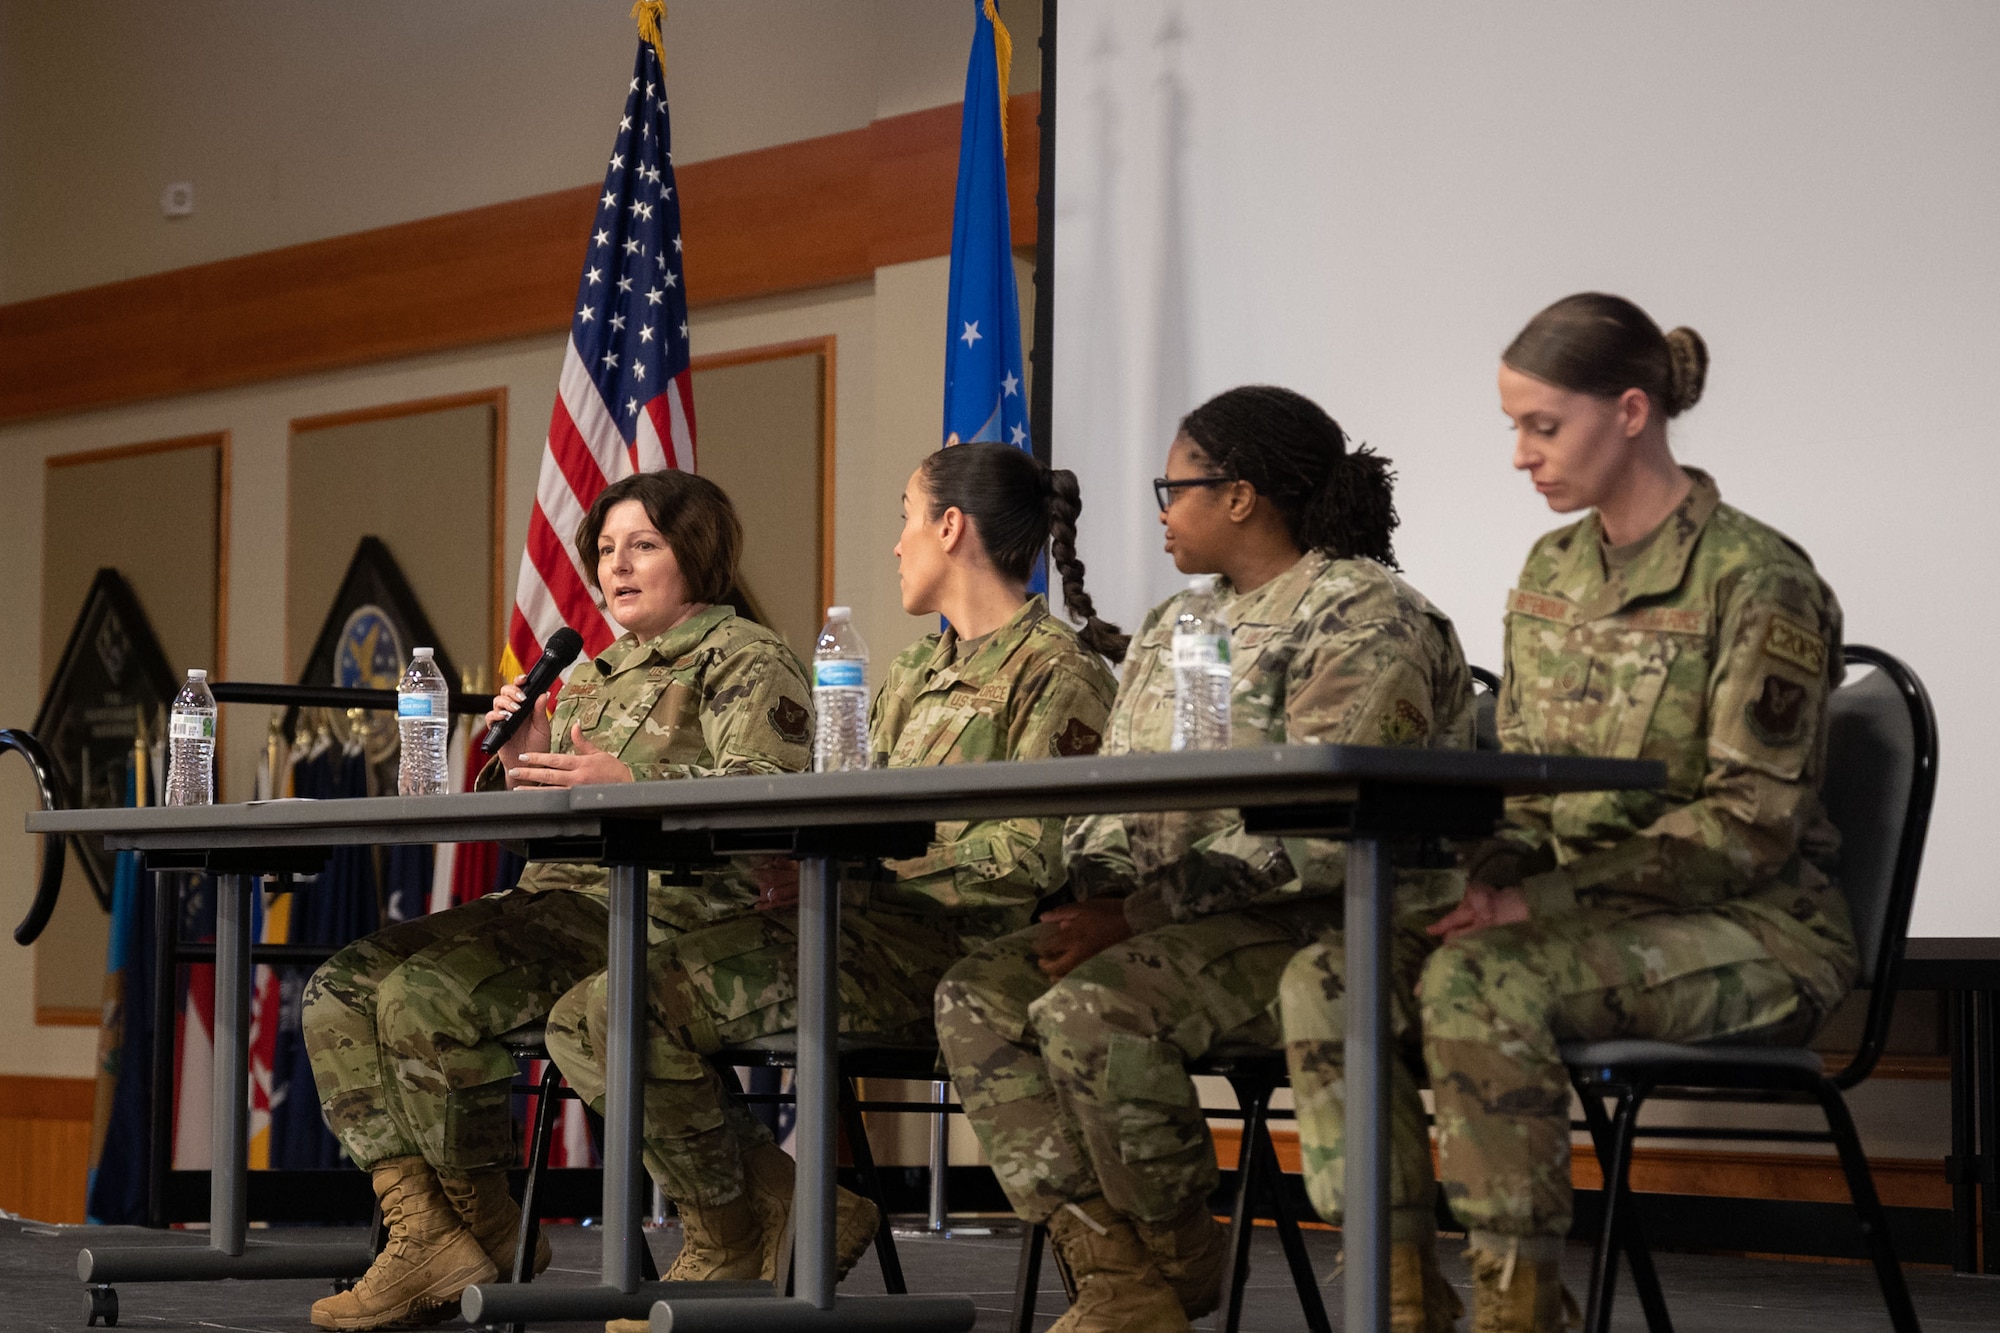 Chief Master Sgt. Kristi Binard, 341st Medical Group superintendent, left, speaks during a Women’s History Month Symposium leadership panel March 10, 2022, at Malmstrom Air Force Base, Mont.